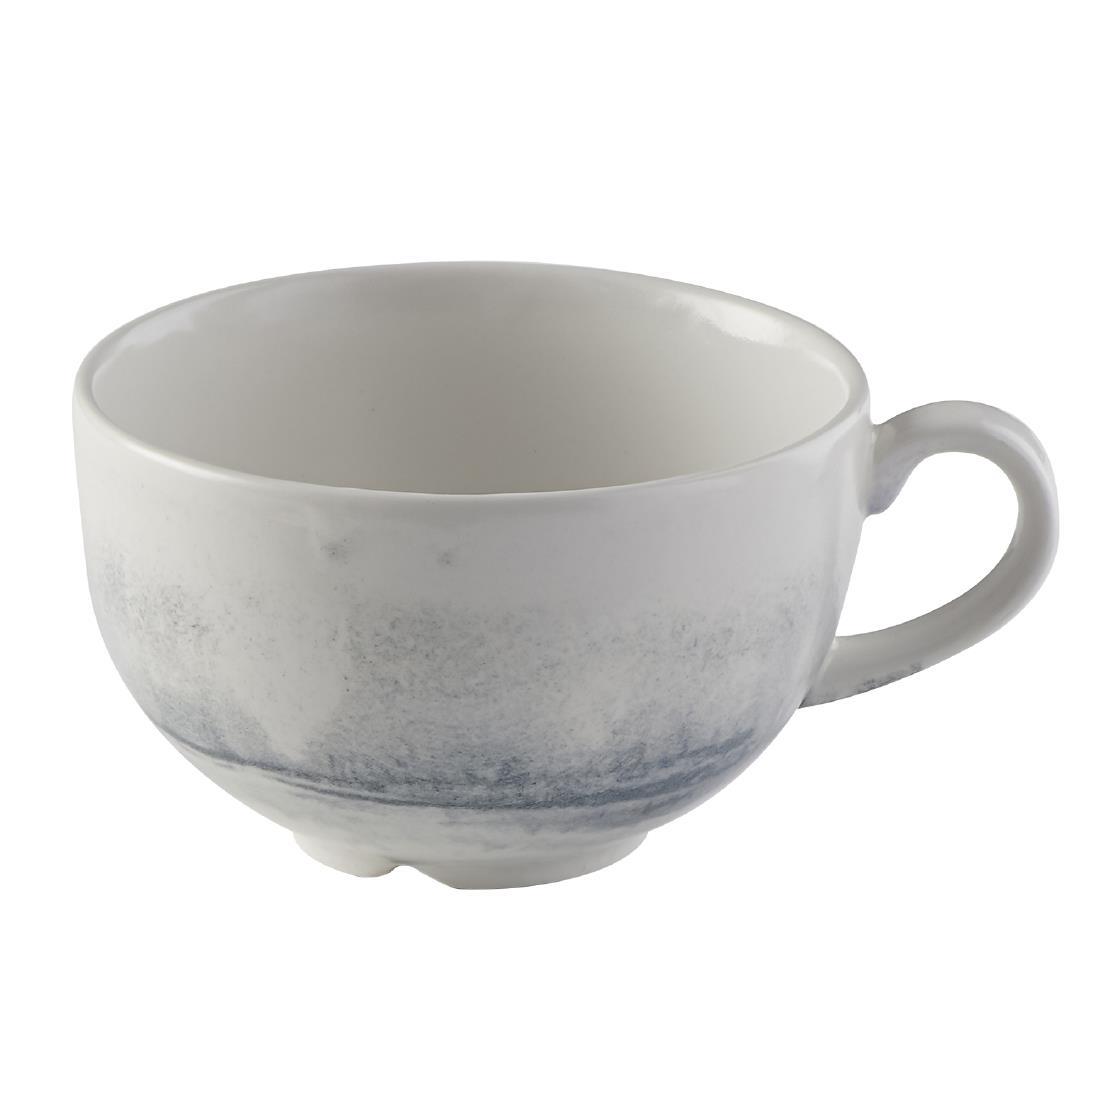 Dudson Makers Finca Limestone Cappuccino Cup 340ml (Pack of 12) - FS771  - 1